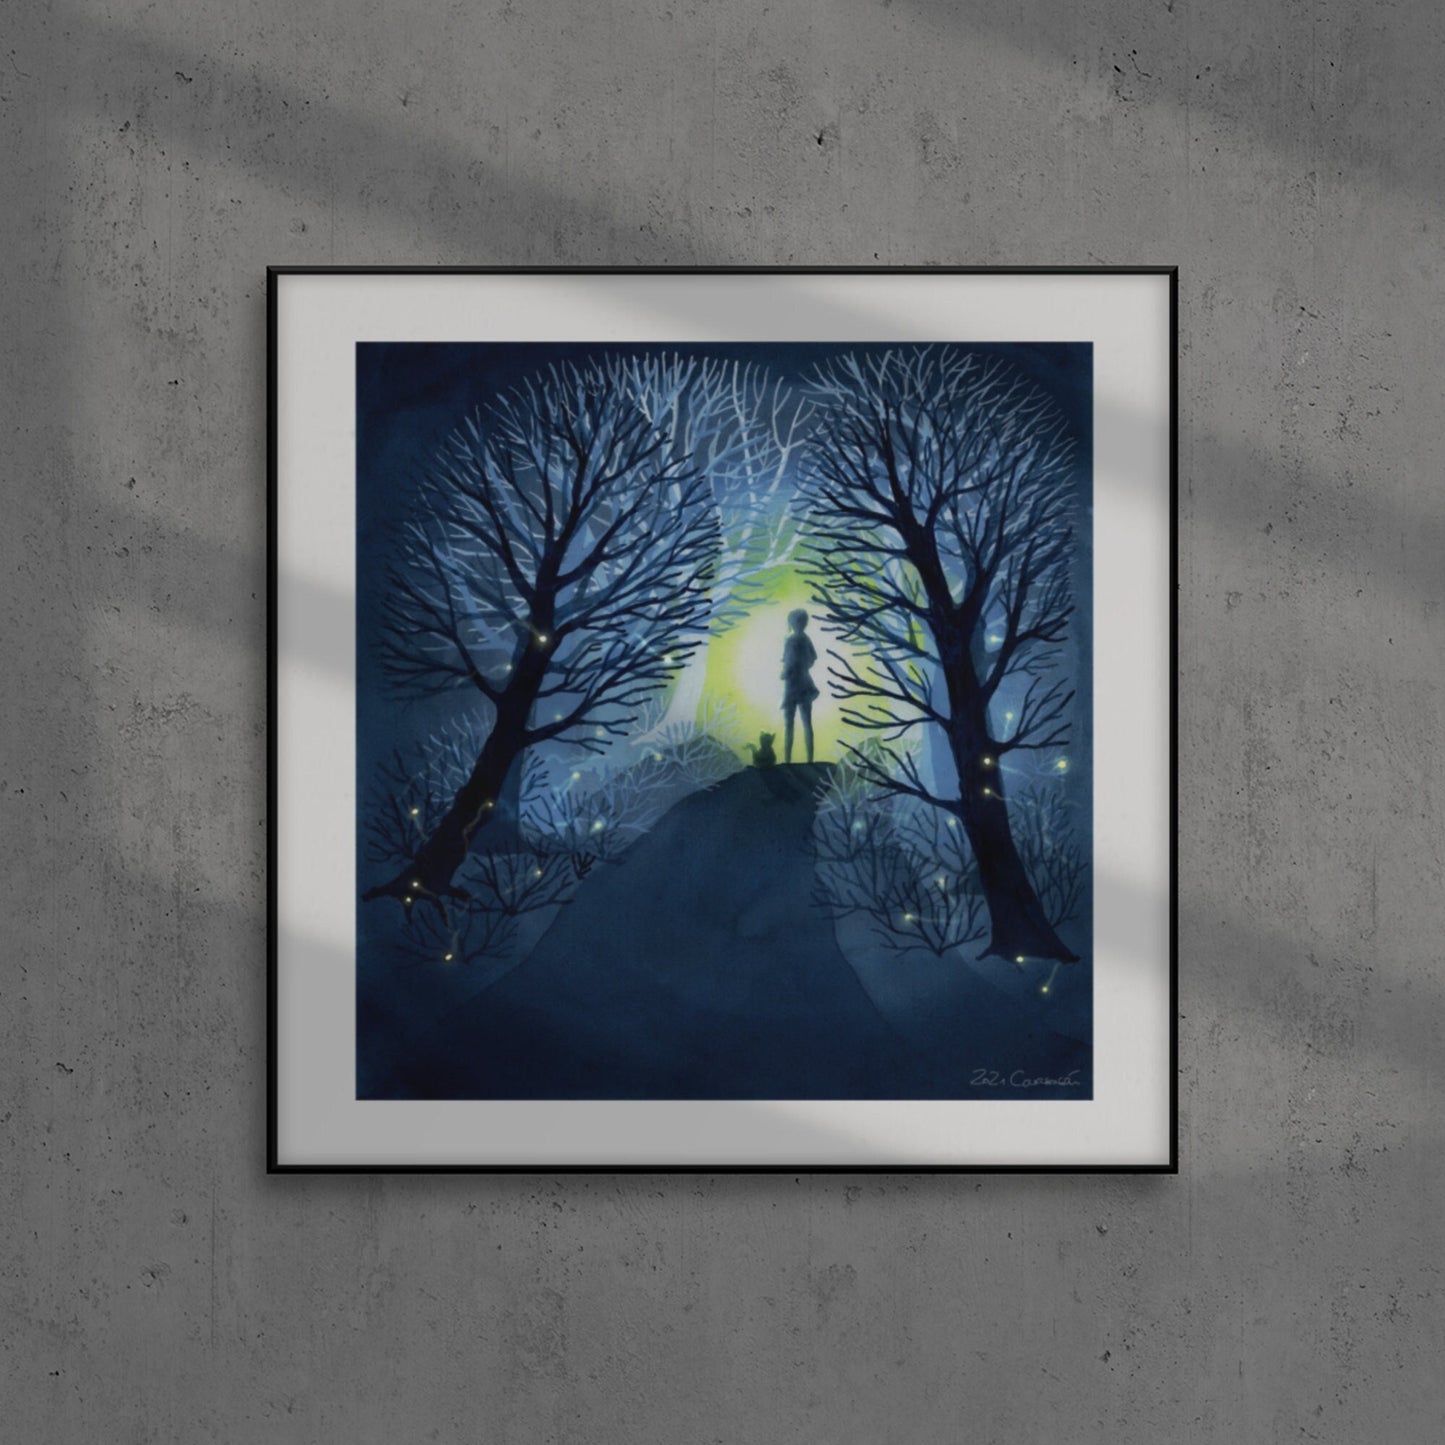 Watercolor 'Fireflies' 30x30cm art print on fine watercolor paper - hand-signed and limited